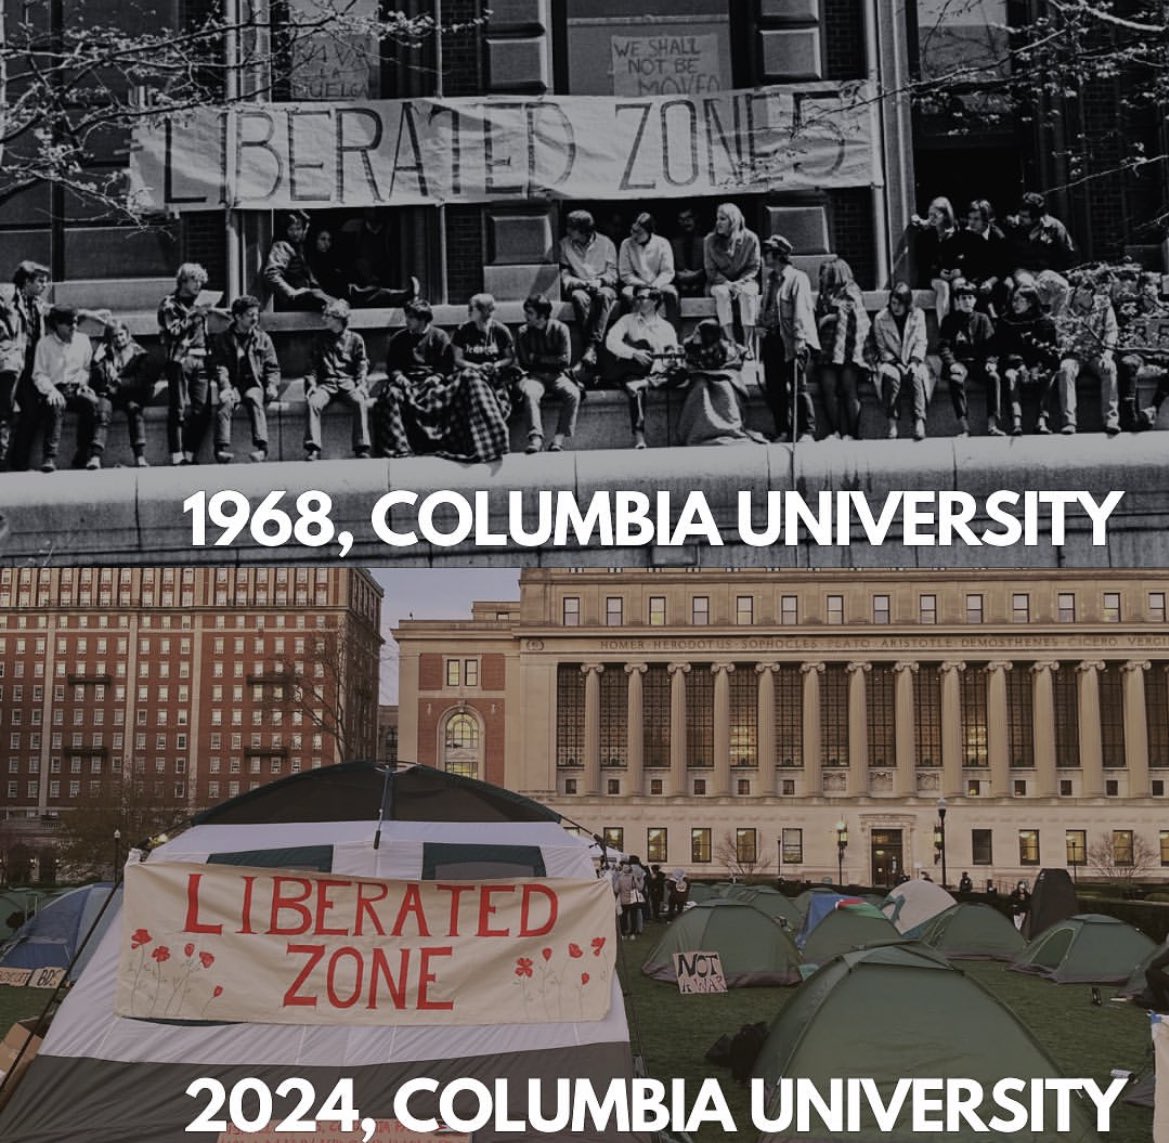 BREAKING ‼️ As of 4 AM this morning, Columbia University students have occupied the center of campus, launching our Gaza Solidarity Encampment. We demand divestment and an end to Columbia’s complicity in genocide.